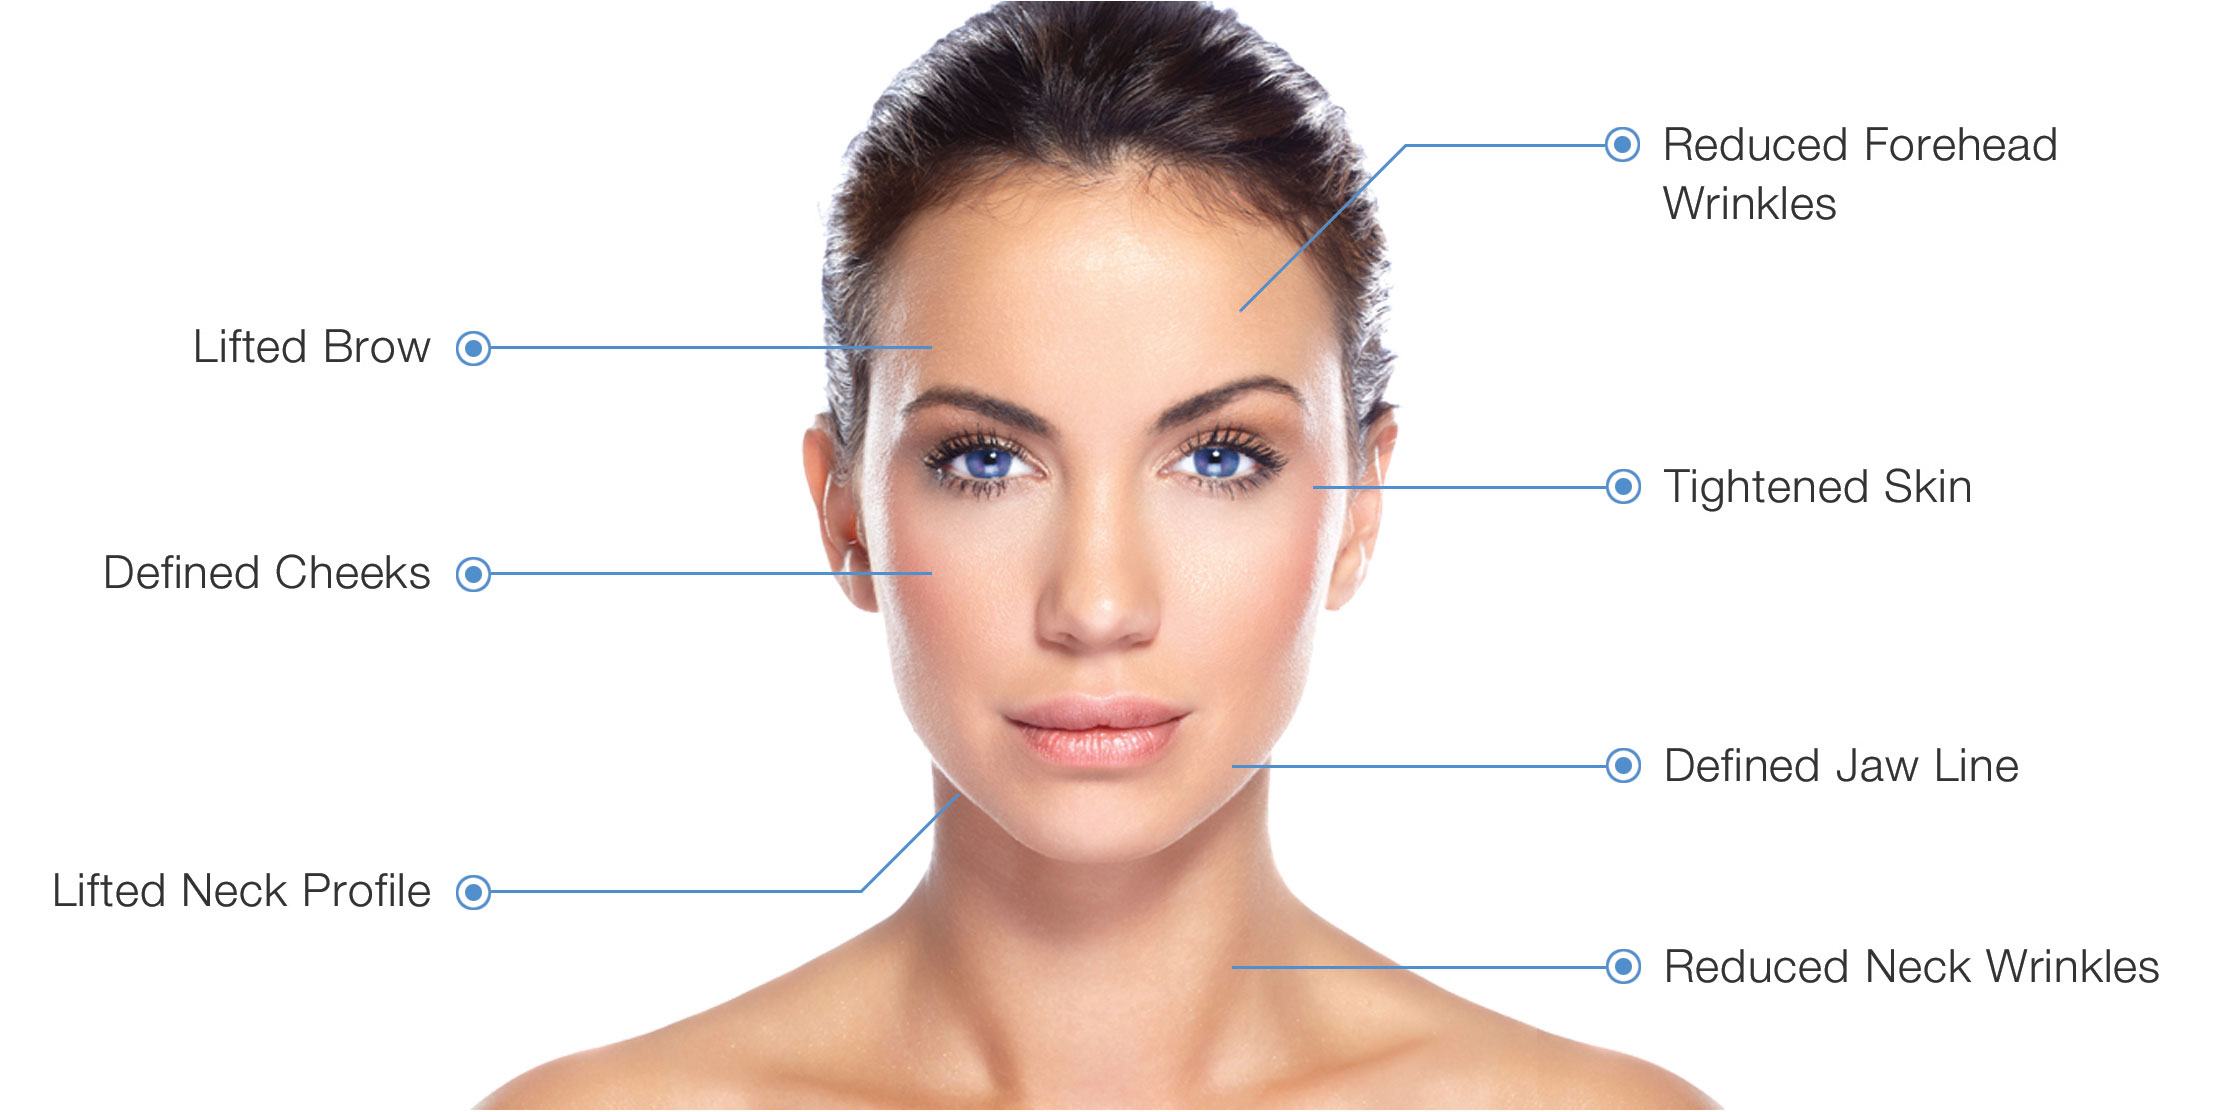 What is Profhilo - Skin tightening in London?